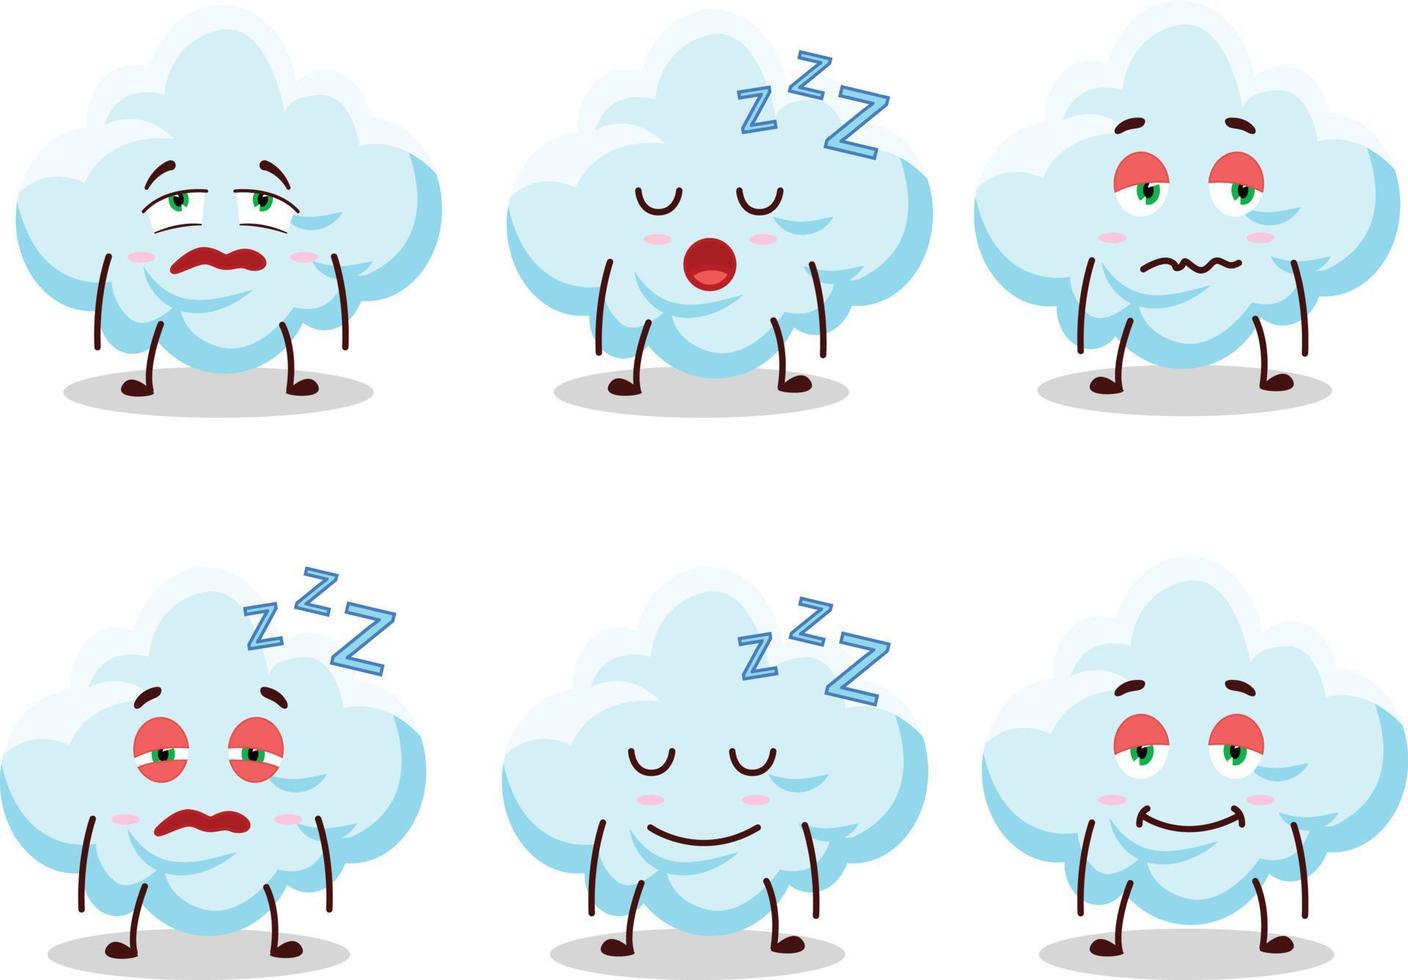 Cartoon character of cloud with sleepy expression vector